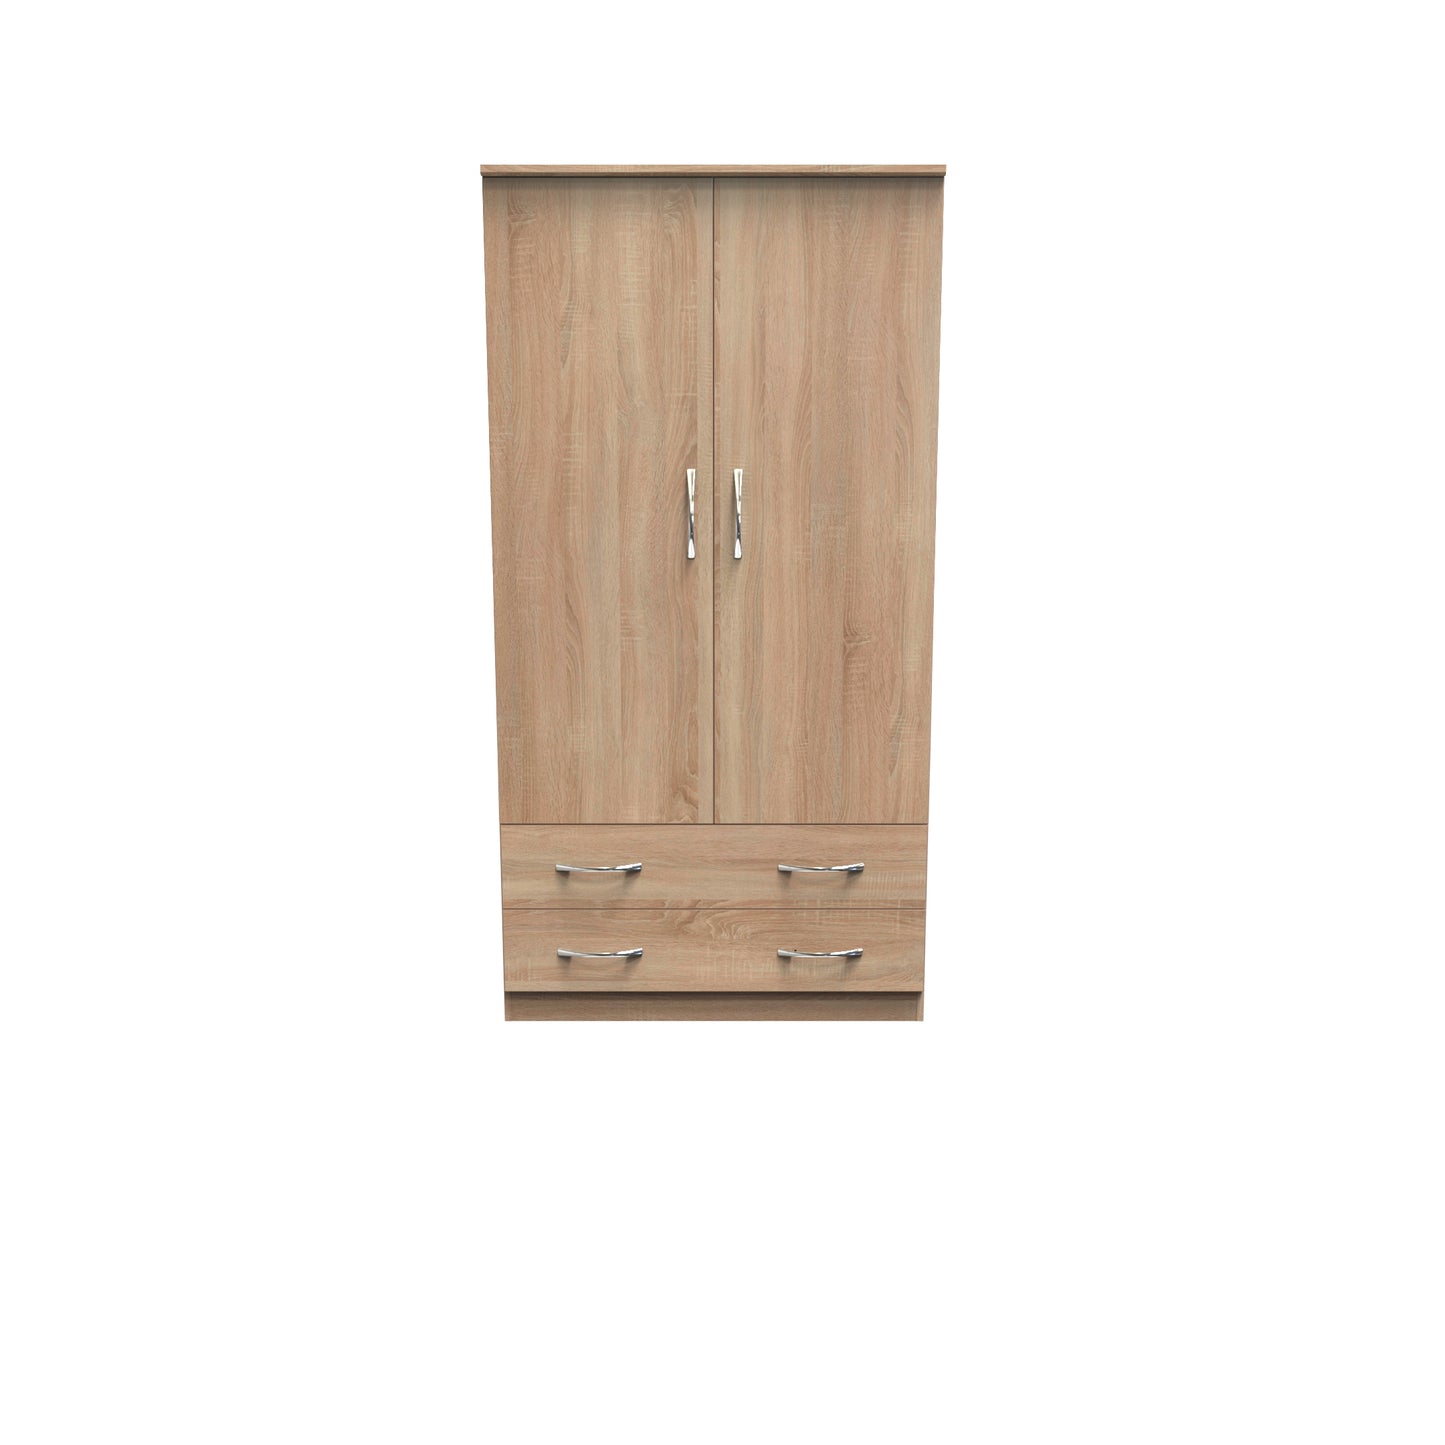 Welcome Furniture Avon 2 door 2 drawer wardrobe on sale Fully Assembled and ready to use.